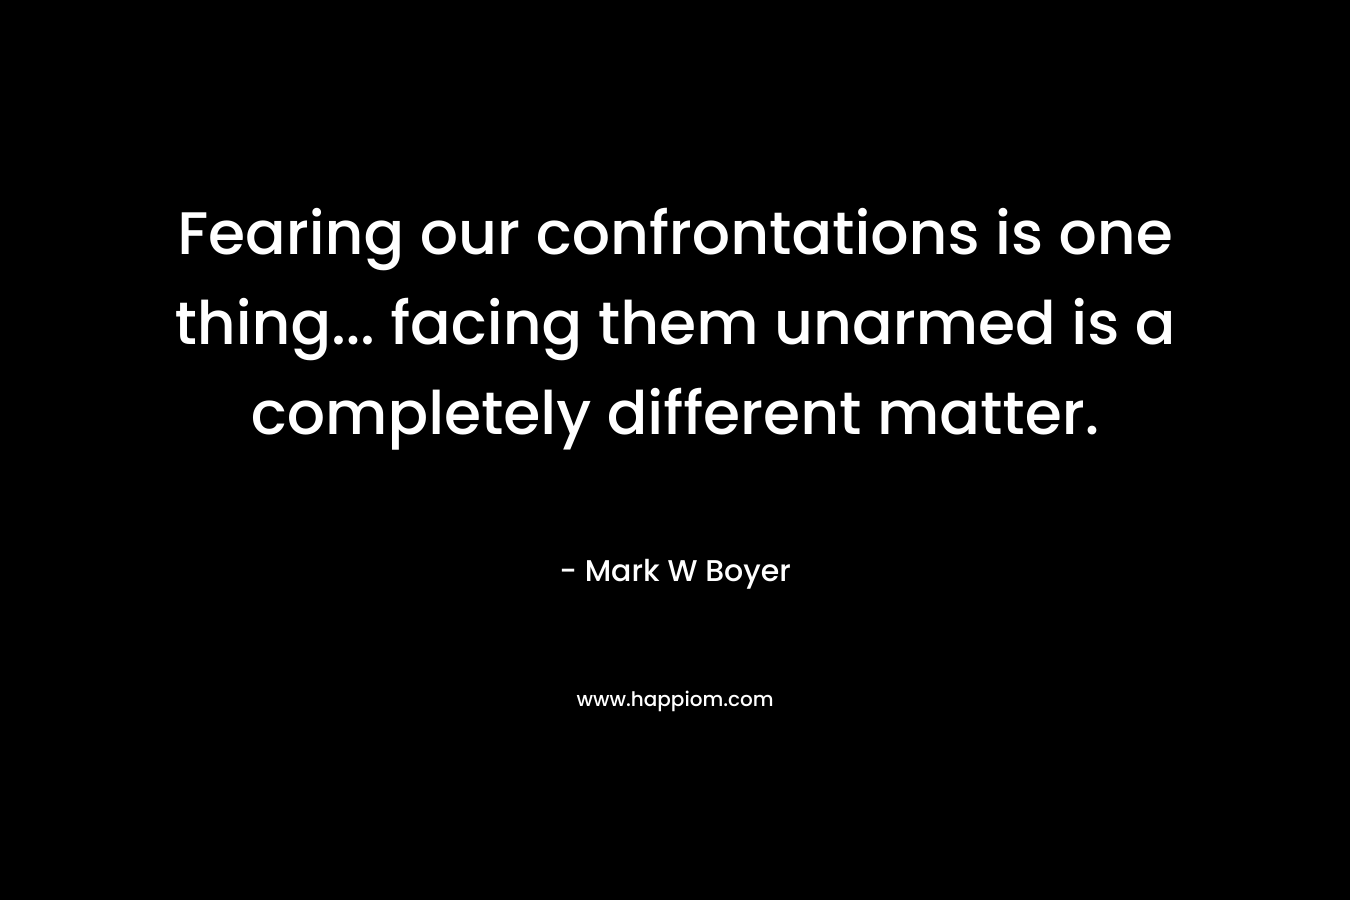 Fearing our confrontations is one thing… facing them unarmed is a completely different matter. – Mark W Boyer